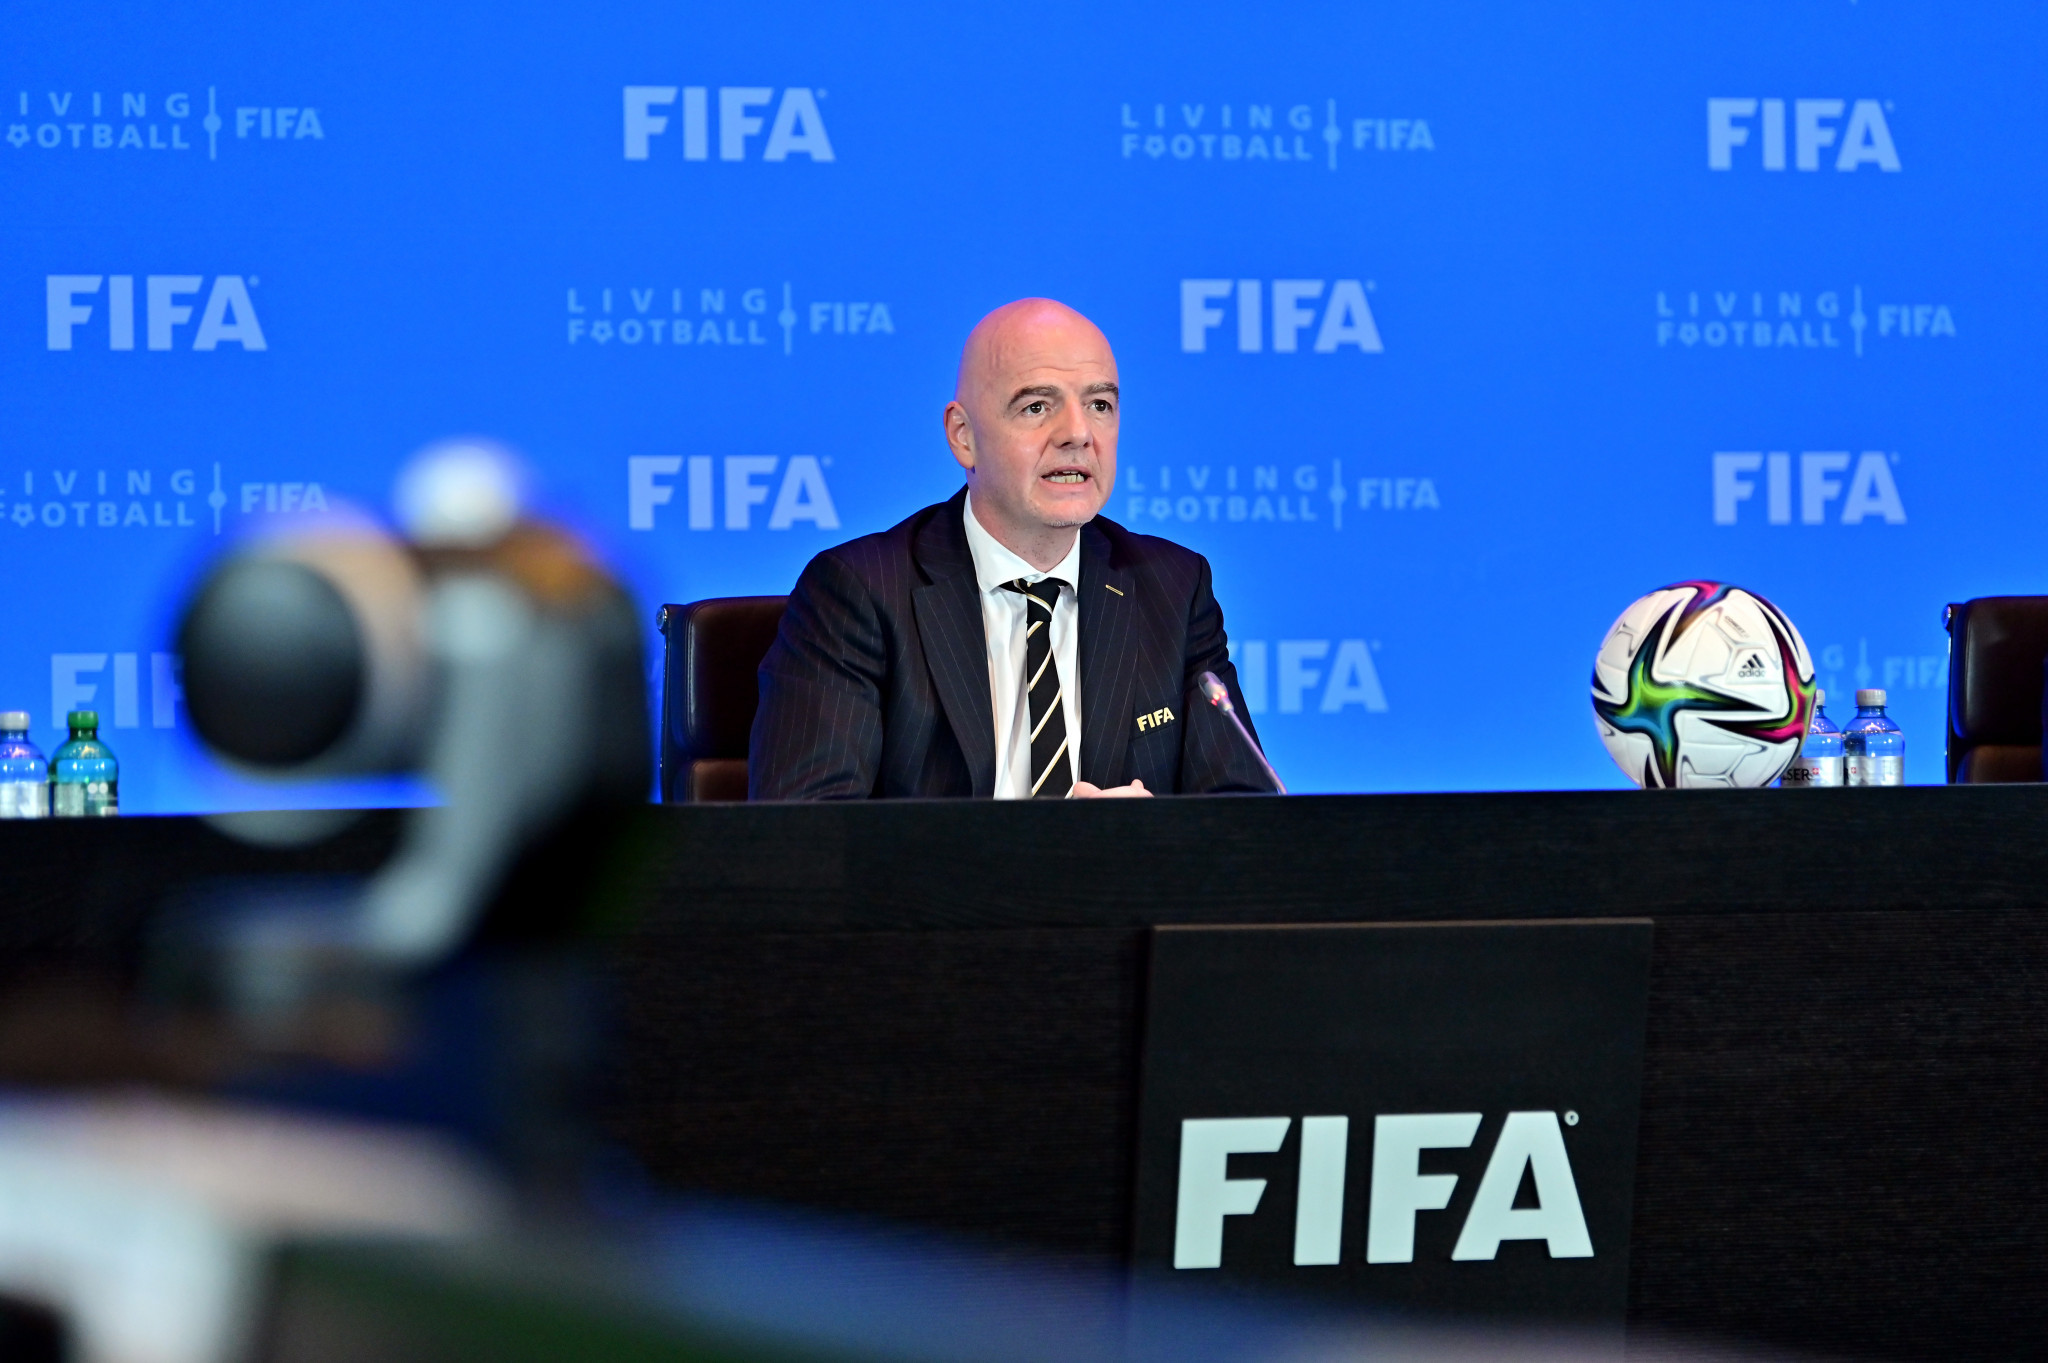 FIFA President Gianni Infantino has moved to Doha ©Getty Images